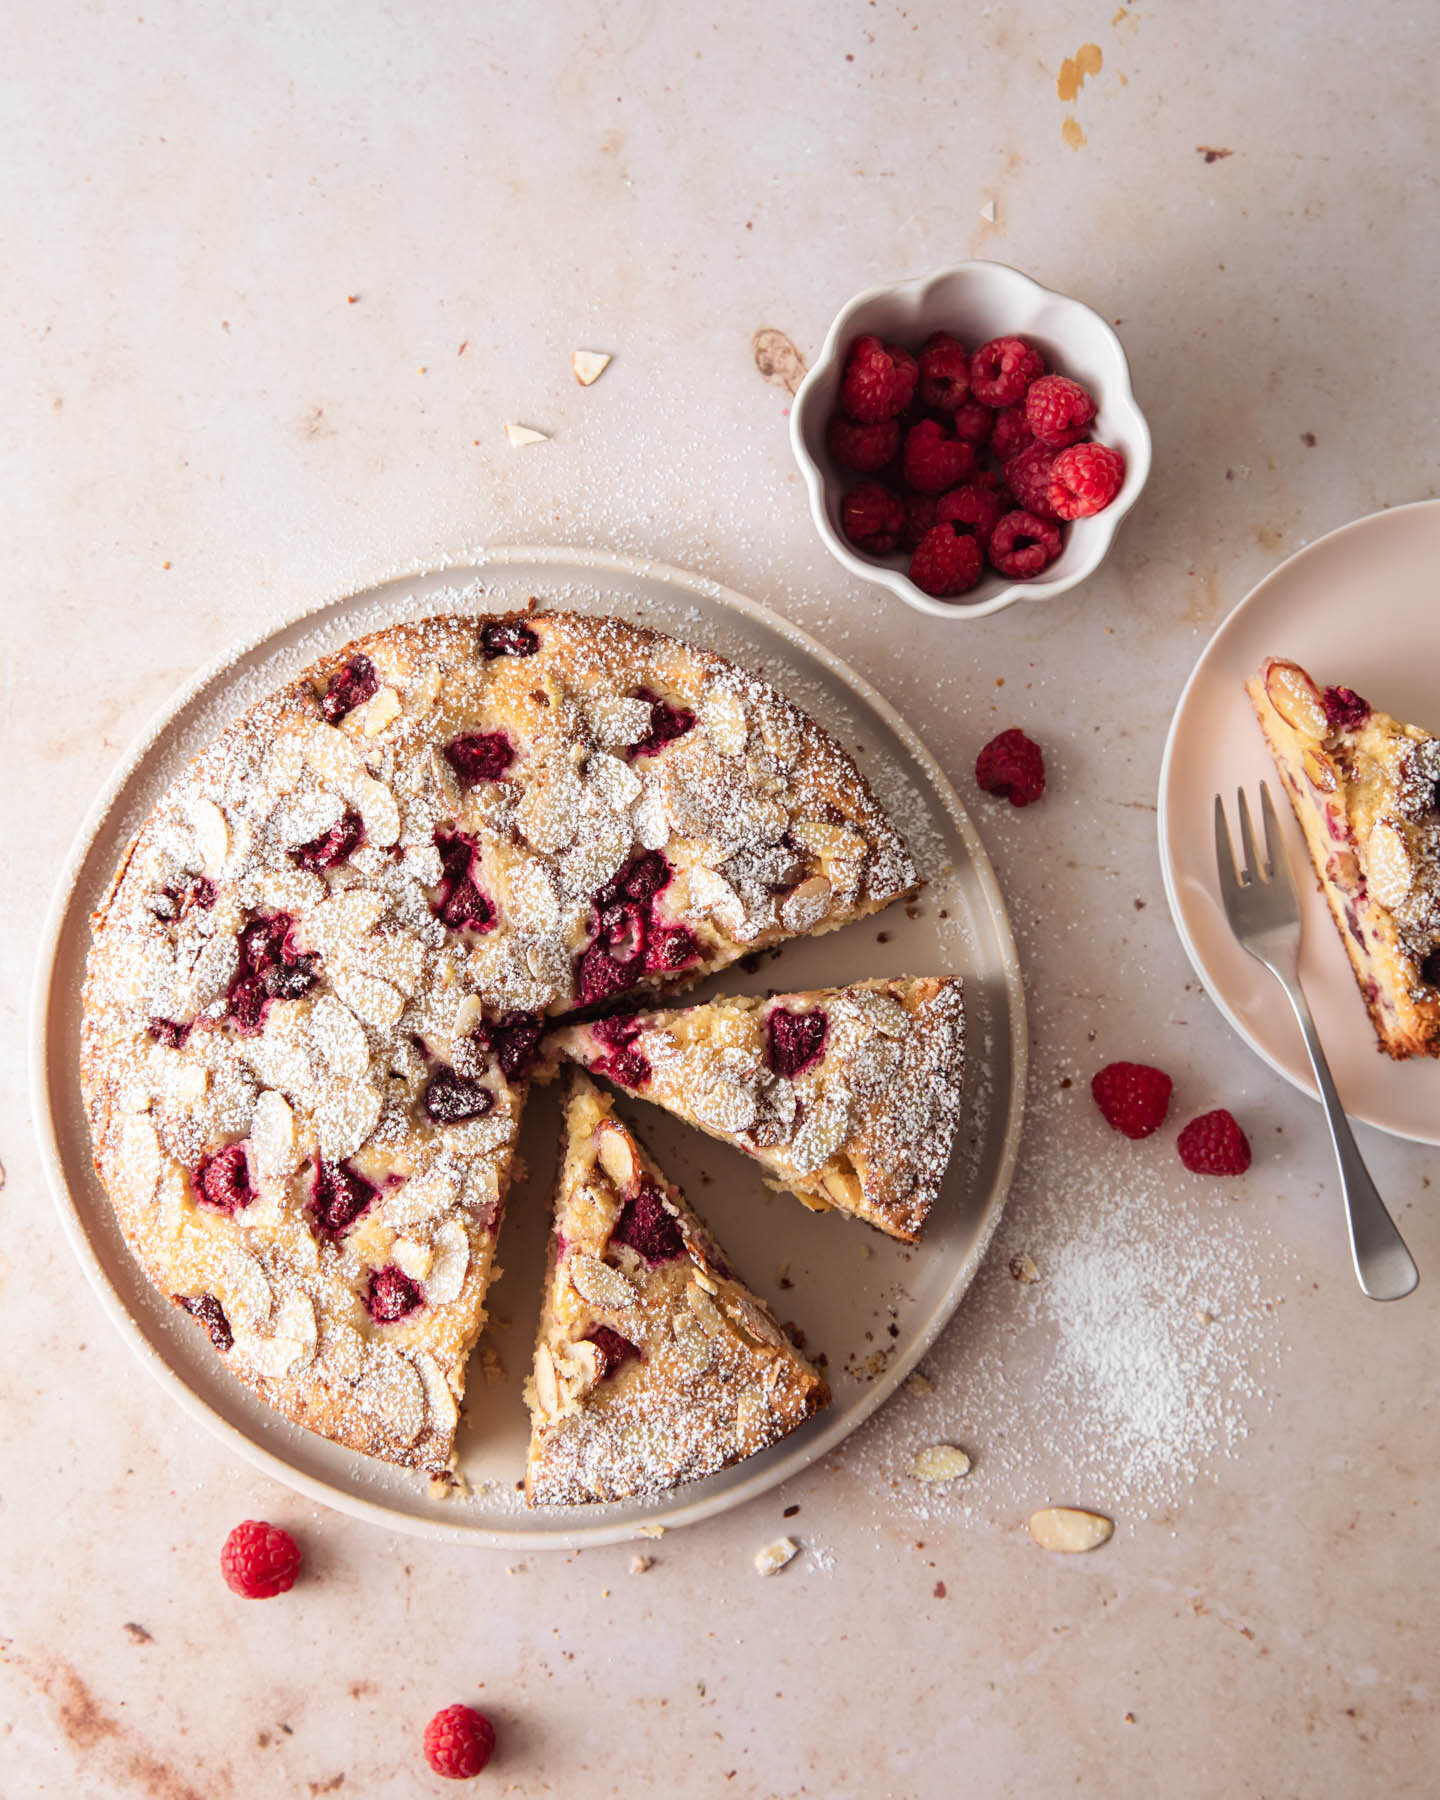 A raspberry almond tea cake with sliced almonds and powdered sugar on top.